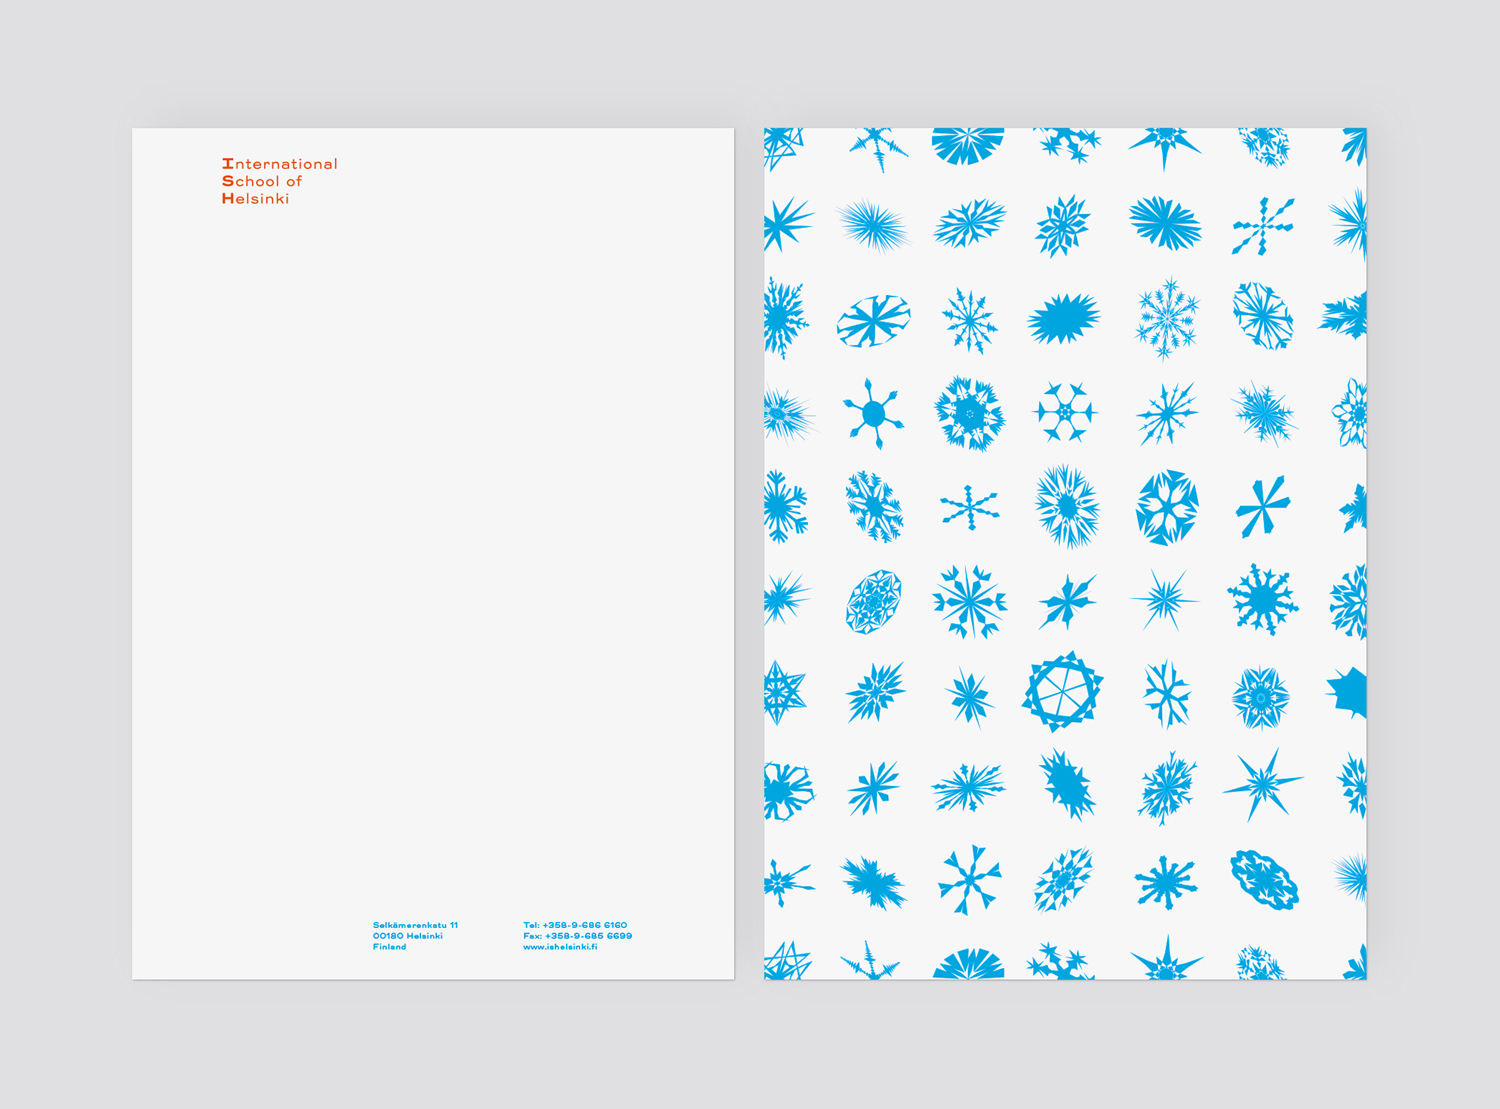 Brand identity and headed paper for the International School of Helsinki by Kokoro & Moi, Finland